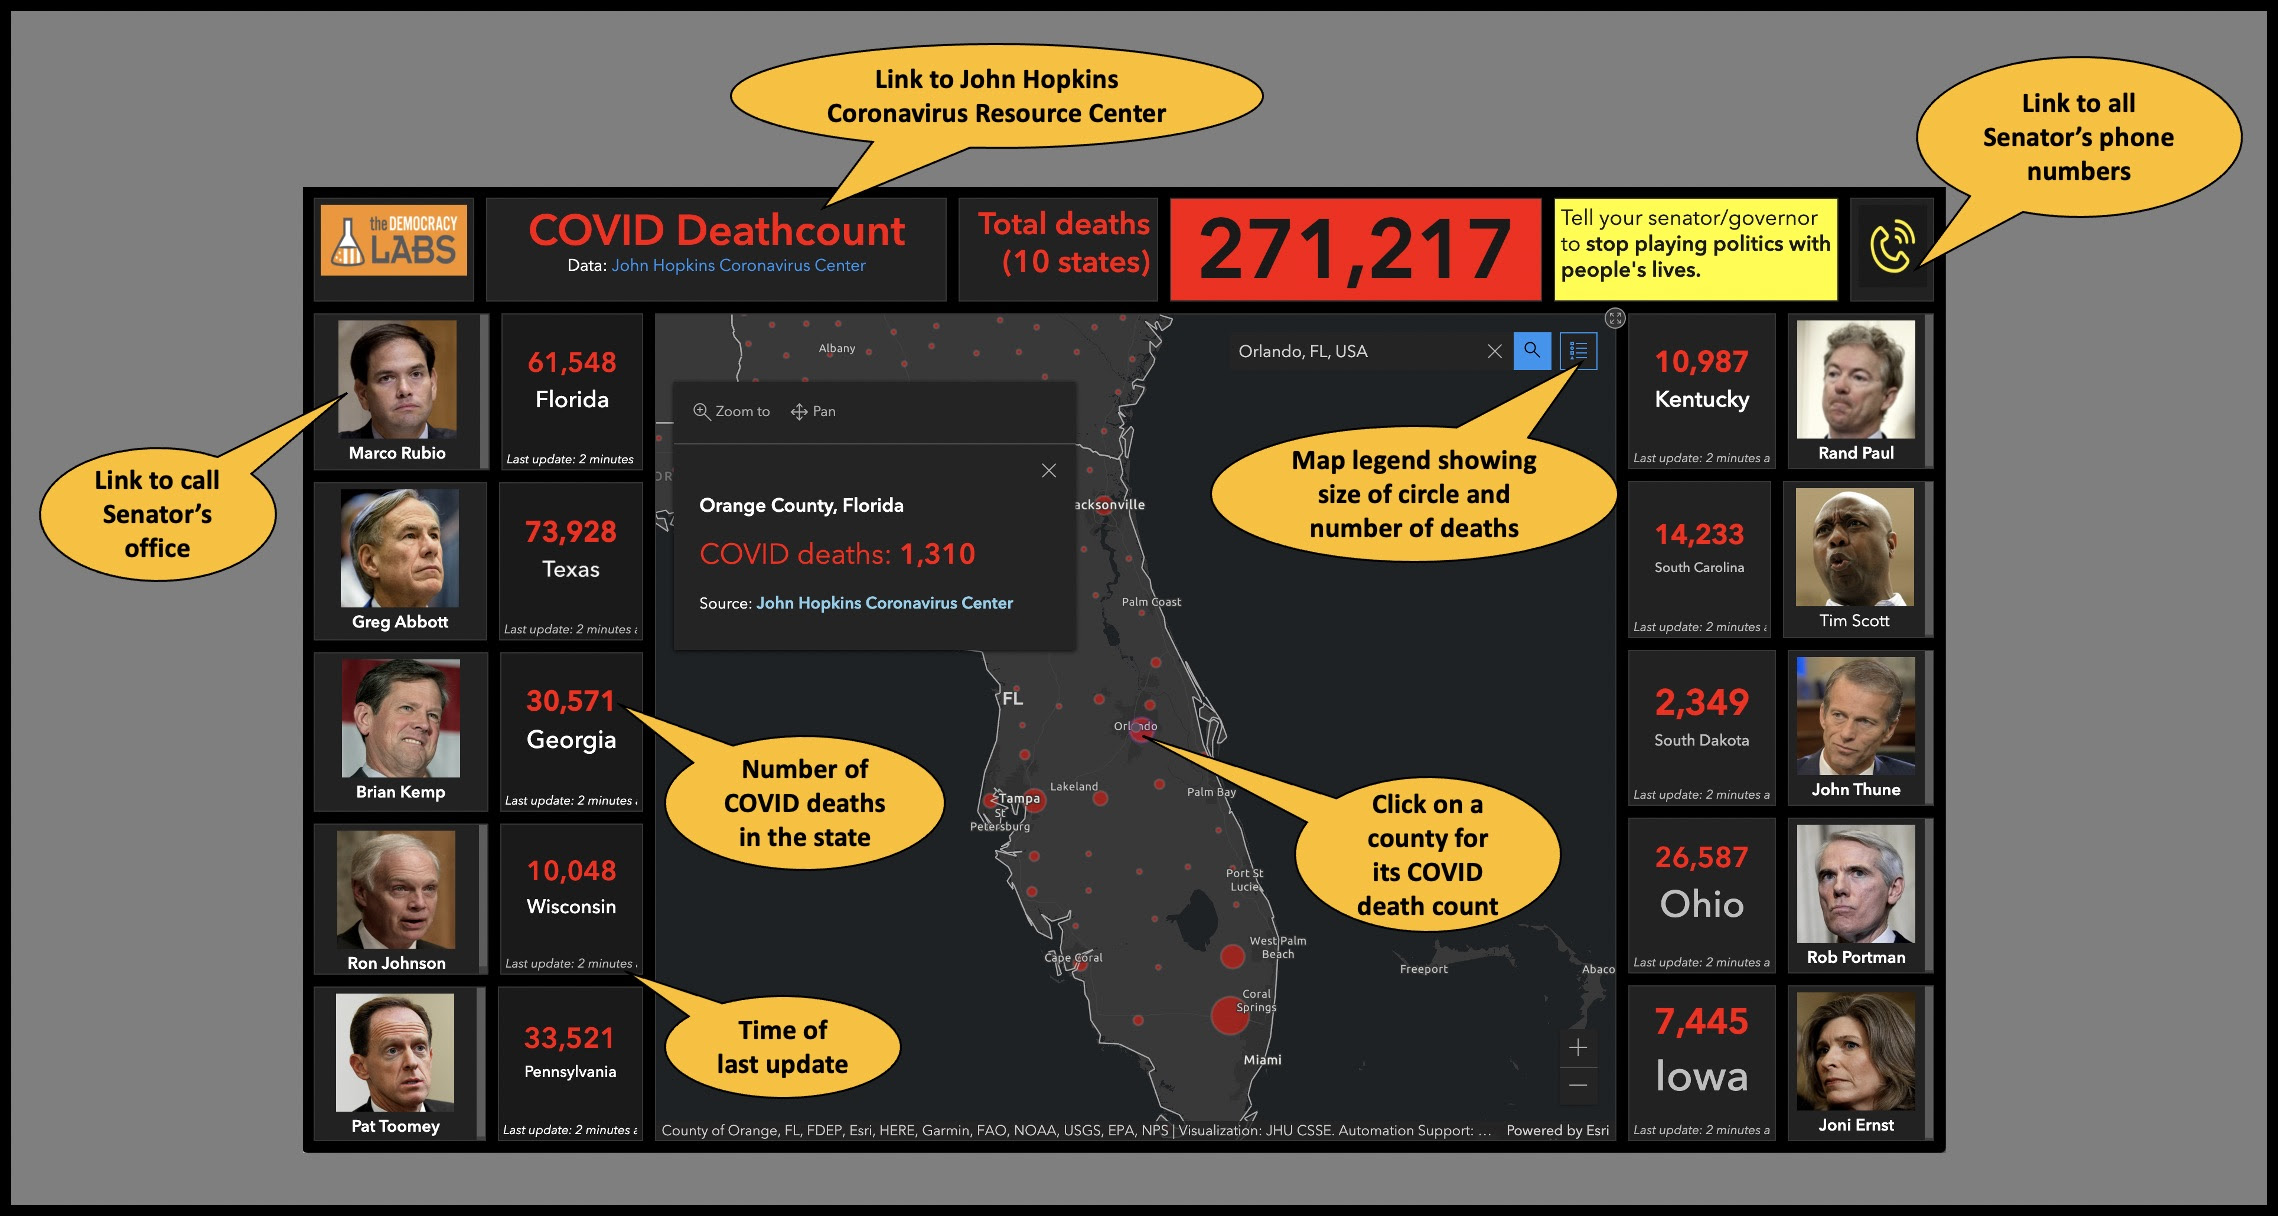 How to use COVID Deathcount dashboard